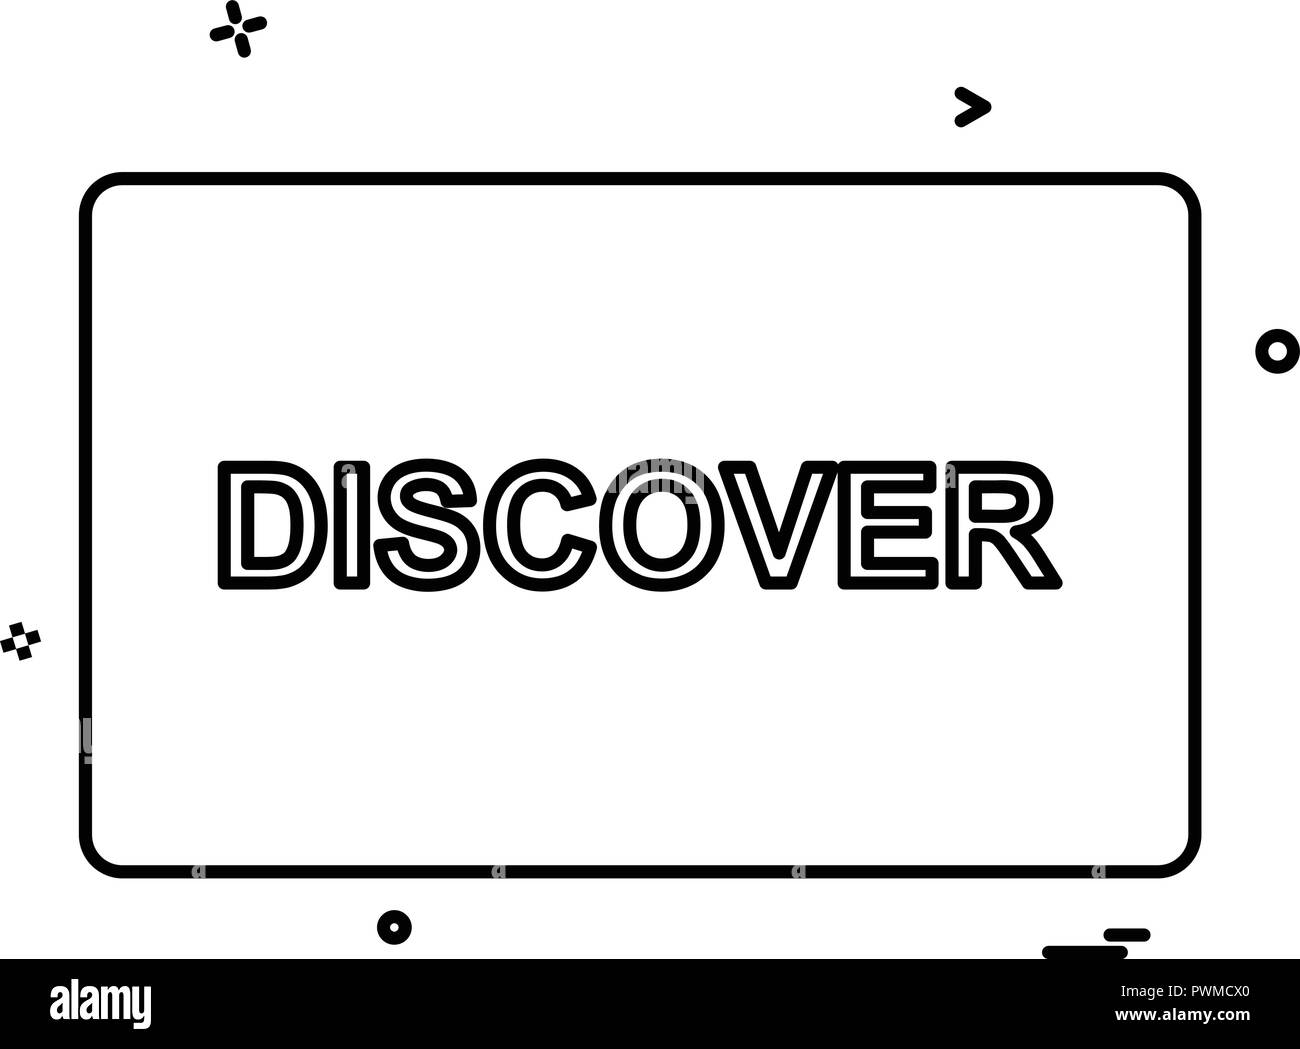 Discover Credit Card Black And White Stock Photos Images Alamy